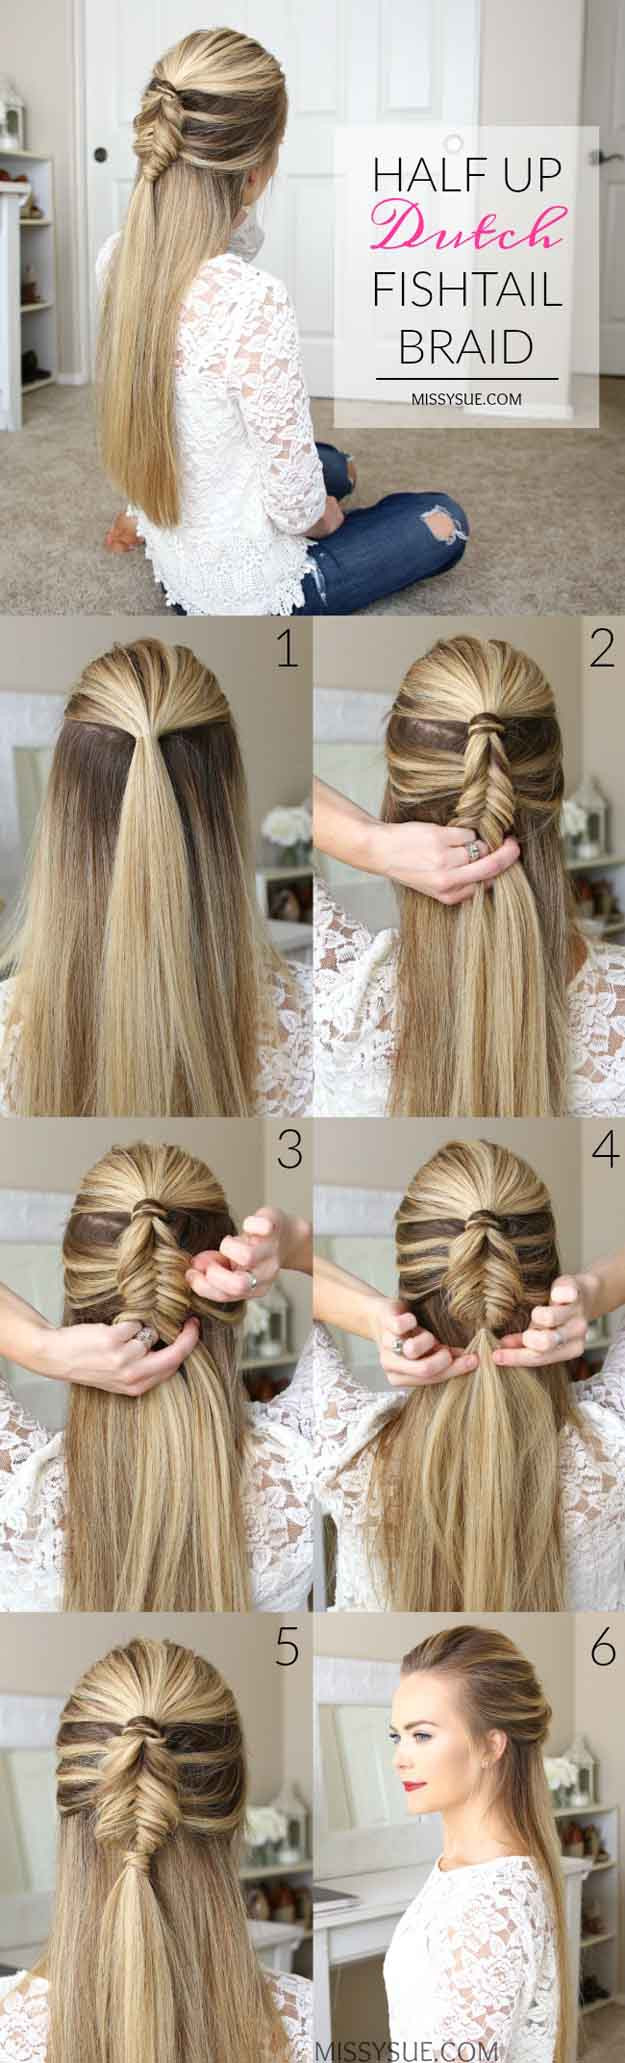 Easy Hairstyles For Kids Step By Step
 41 Best Hair Braiding Tutorials Page 2 of 4 The Goddess